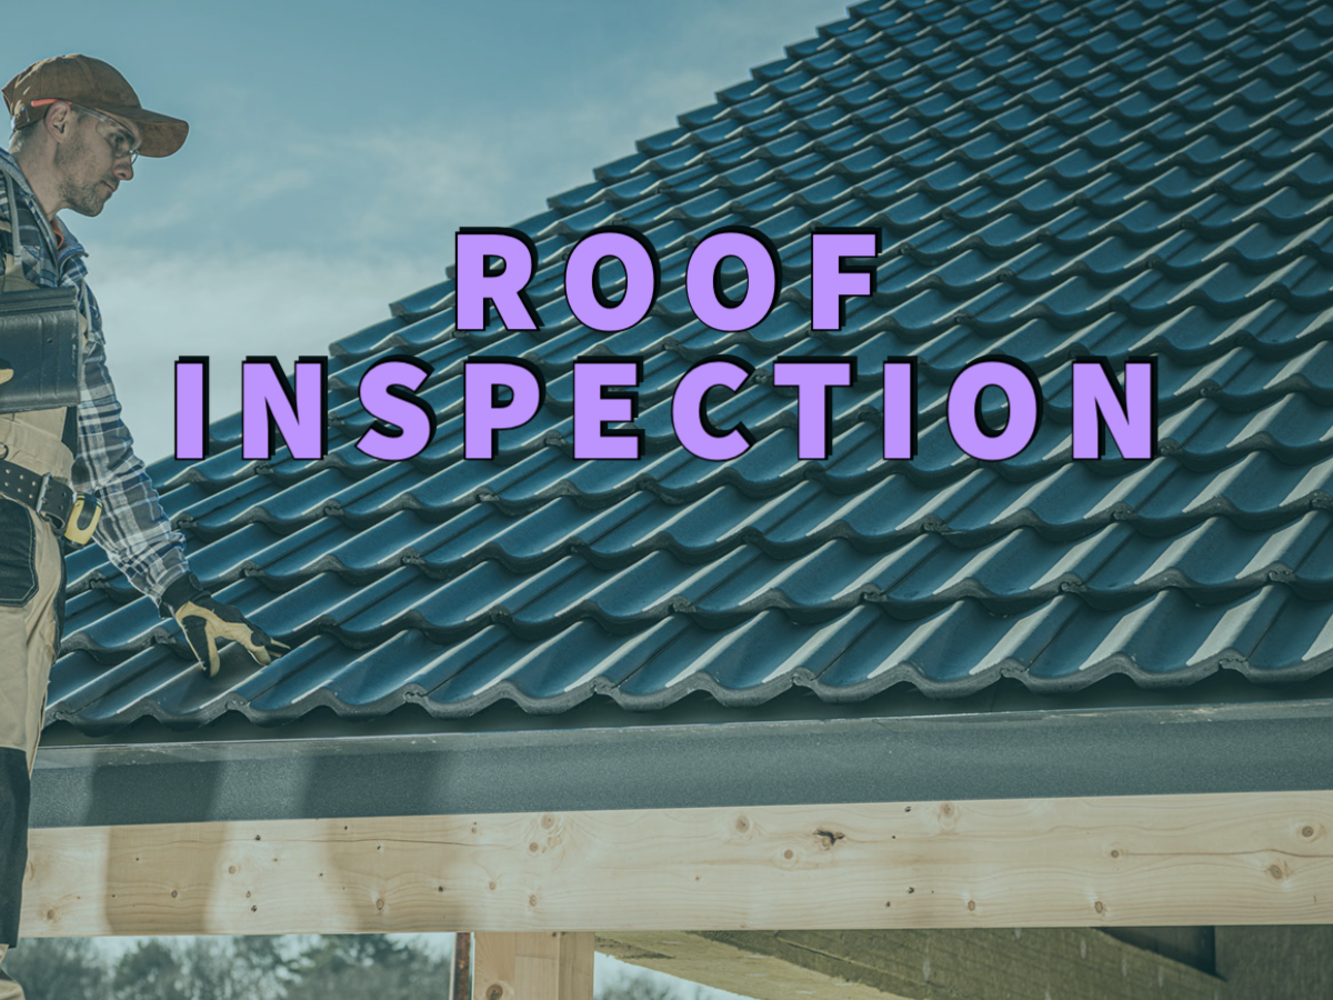 Roof inspection written in purple over tile roof with man standing on ladder nearby